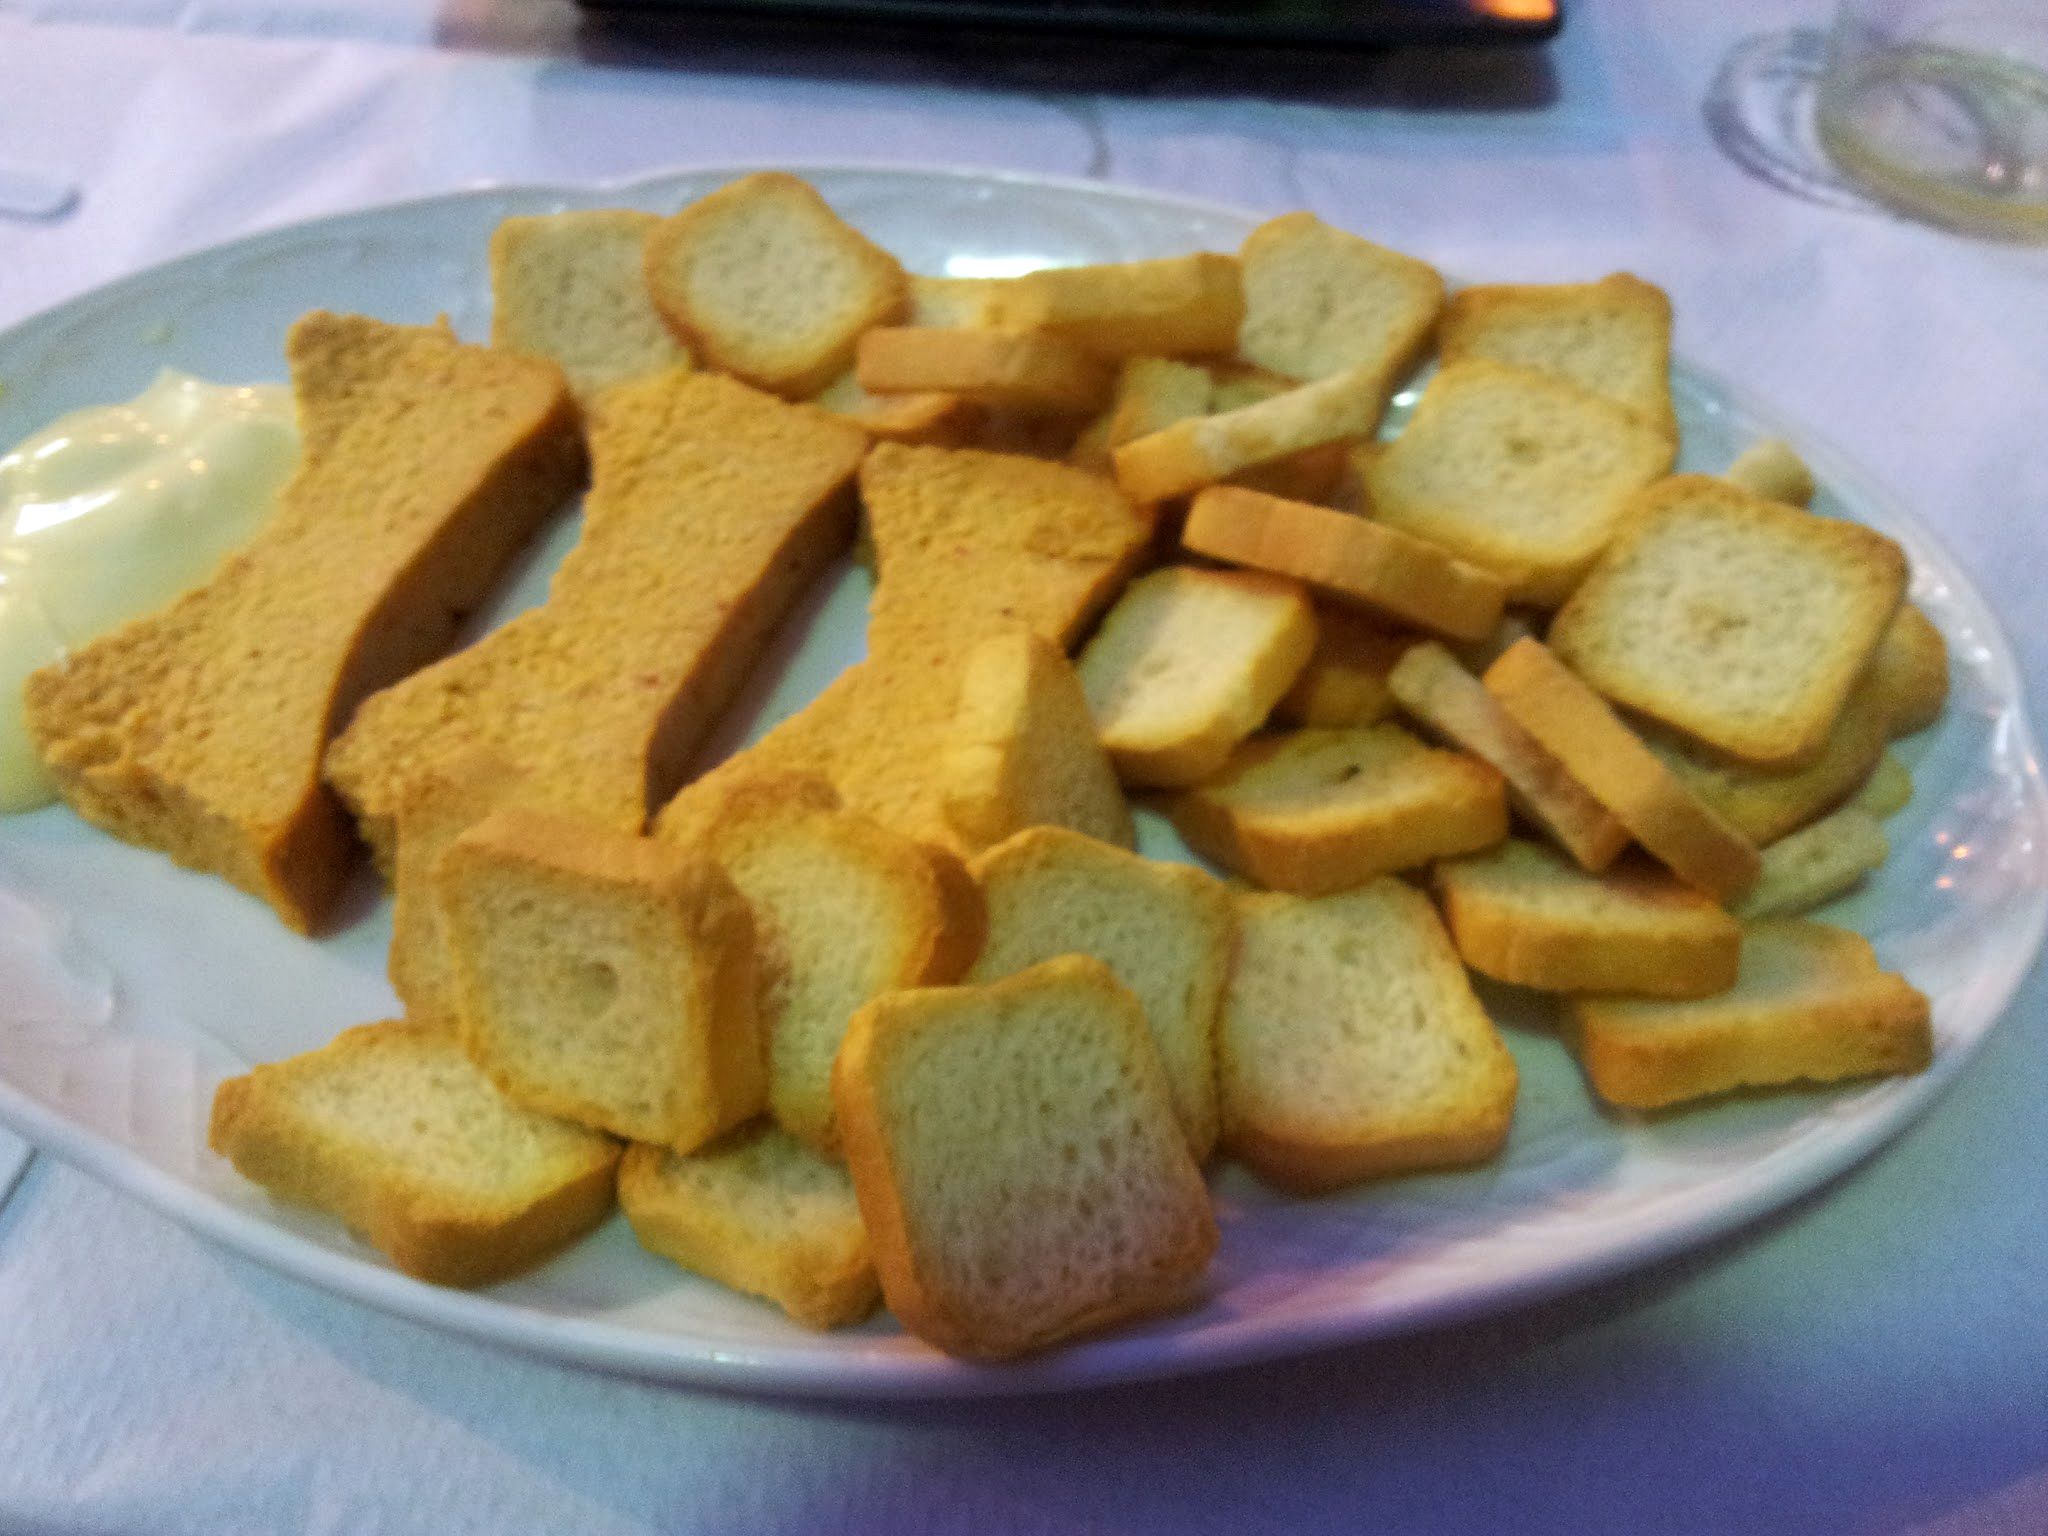 several slices of bread are arranged on a plate